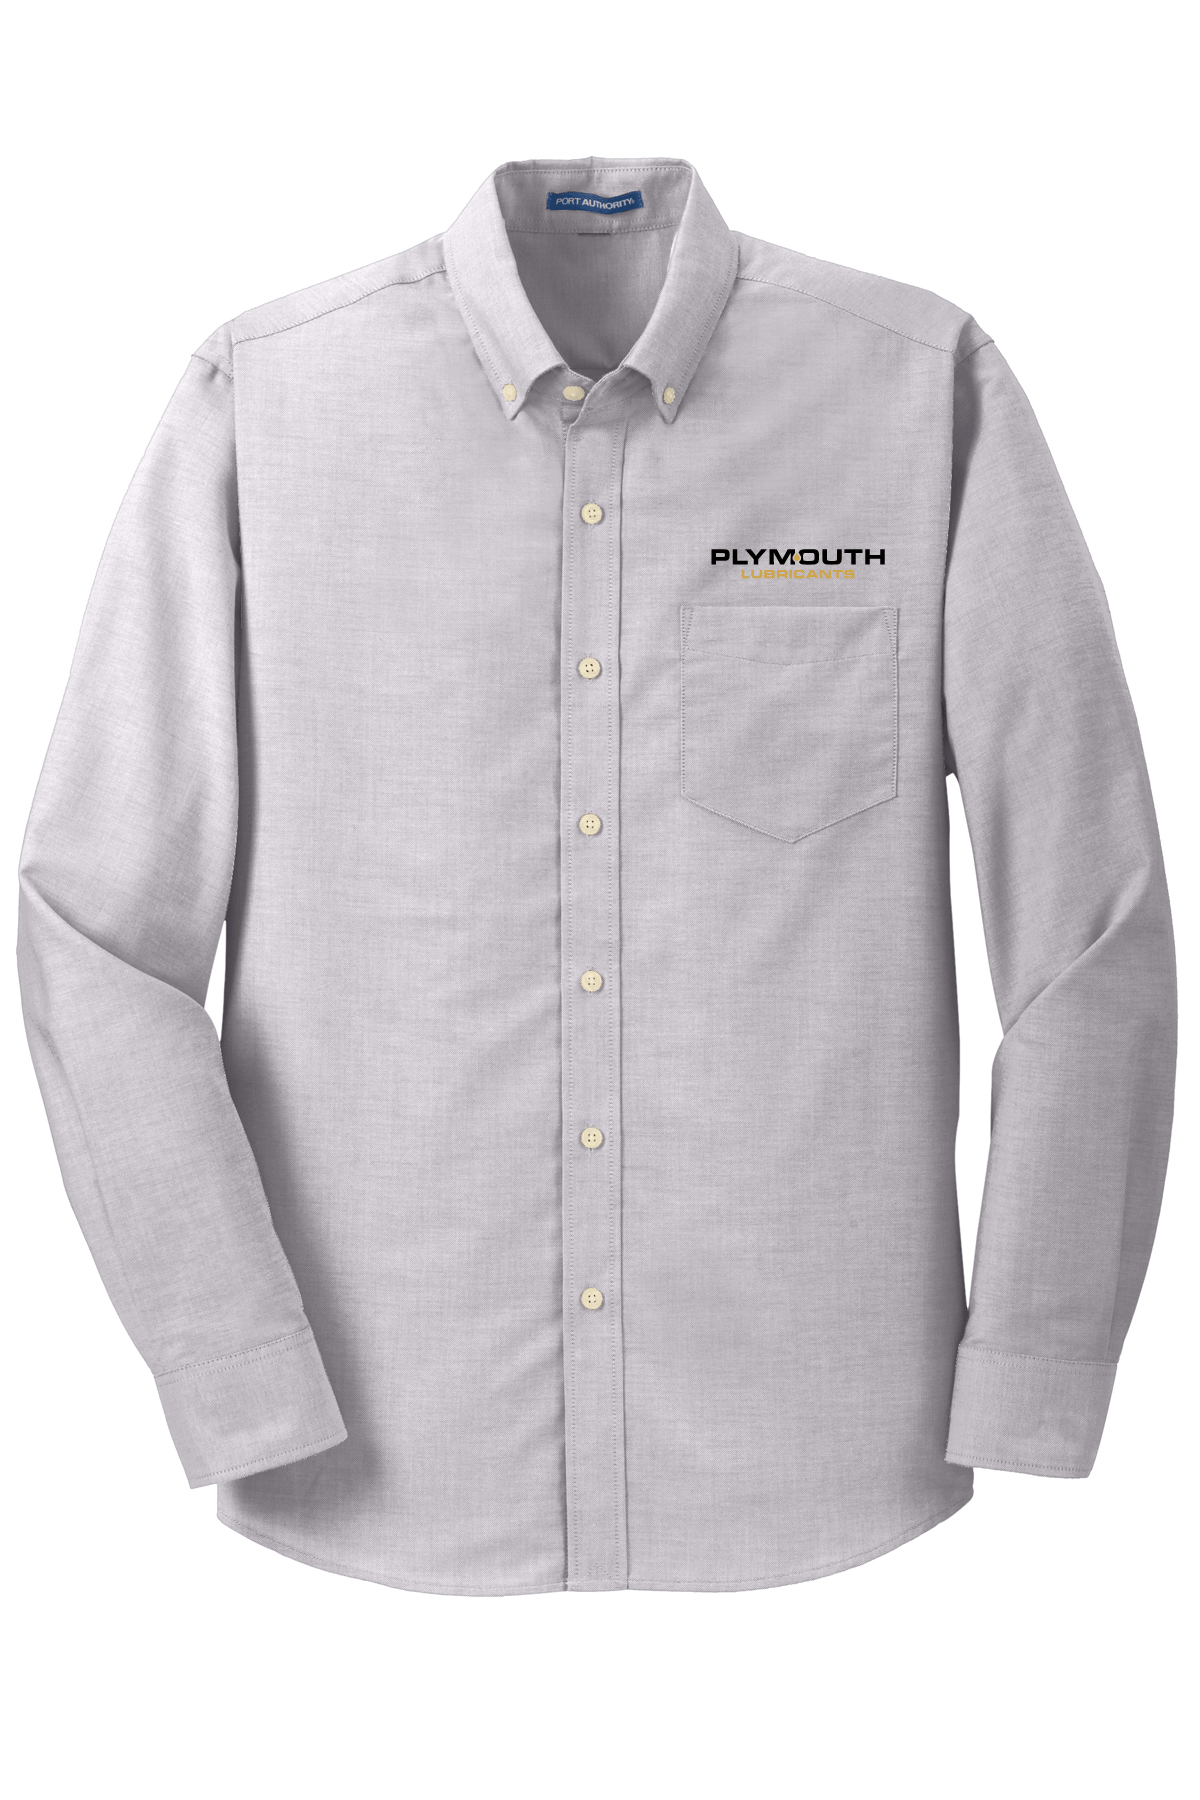 S658- PLYMOUTH LUBES Port Authority® SuperPro™ Oxford Shirt